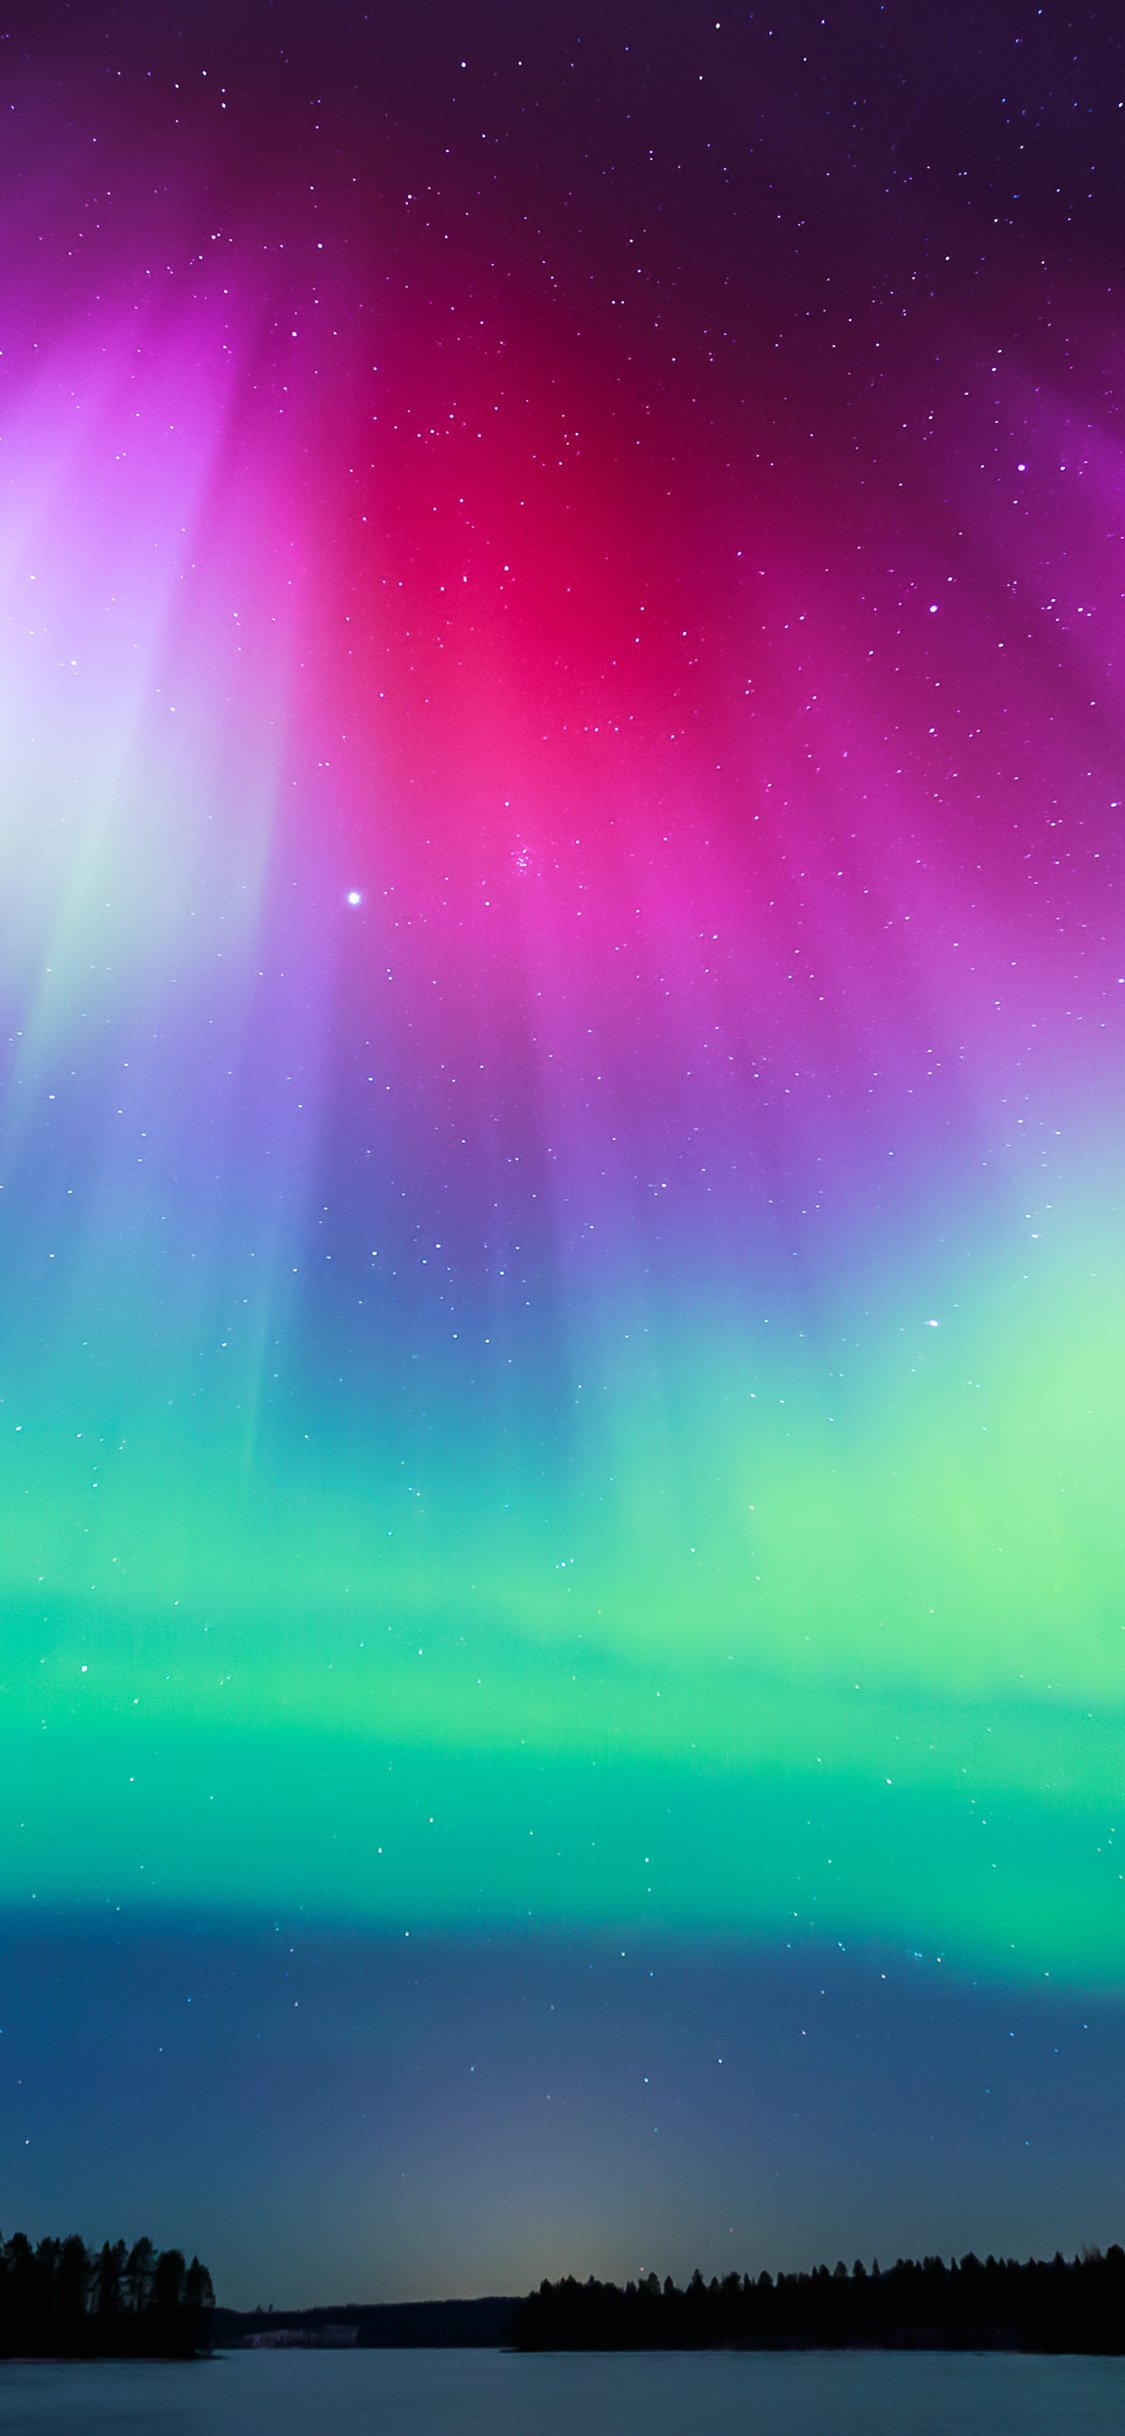 Aurora Borealis Nature 4k iPhone XS, iPhone iPhone X HD 4k Wallpaper, Image, Background, Photo and Picture